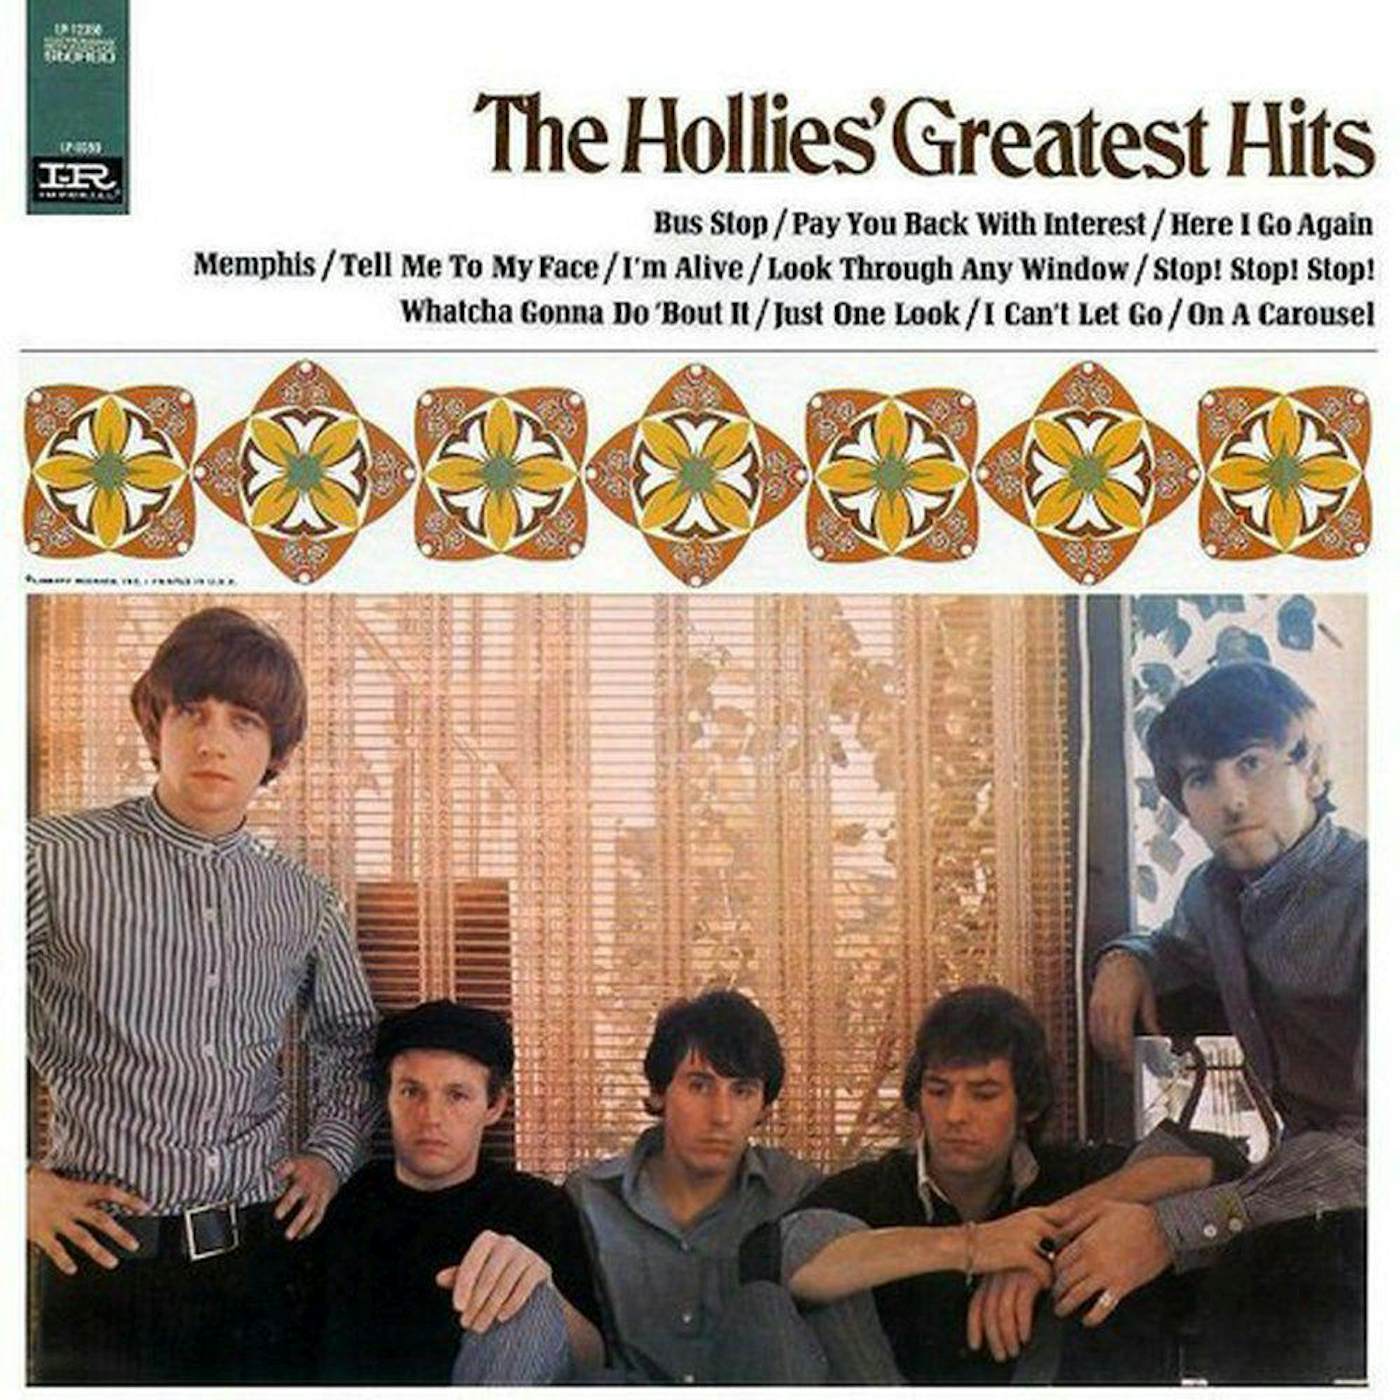 The Hollies' Greatest Hits Vinyl Record